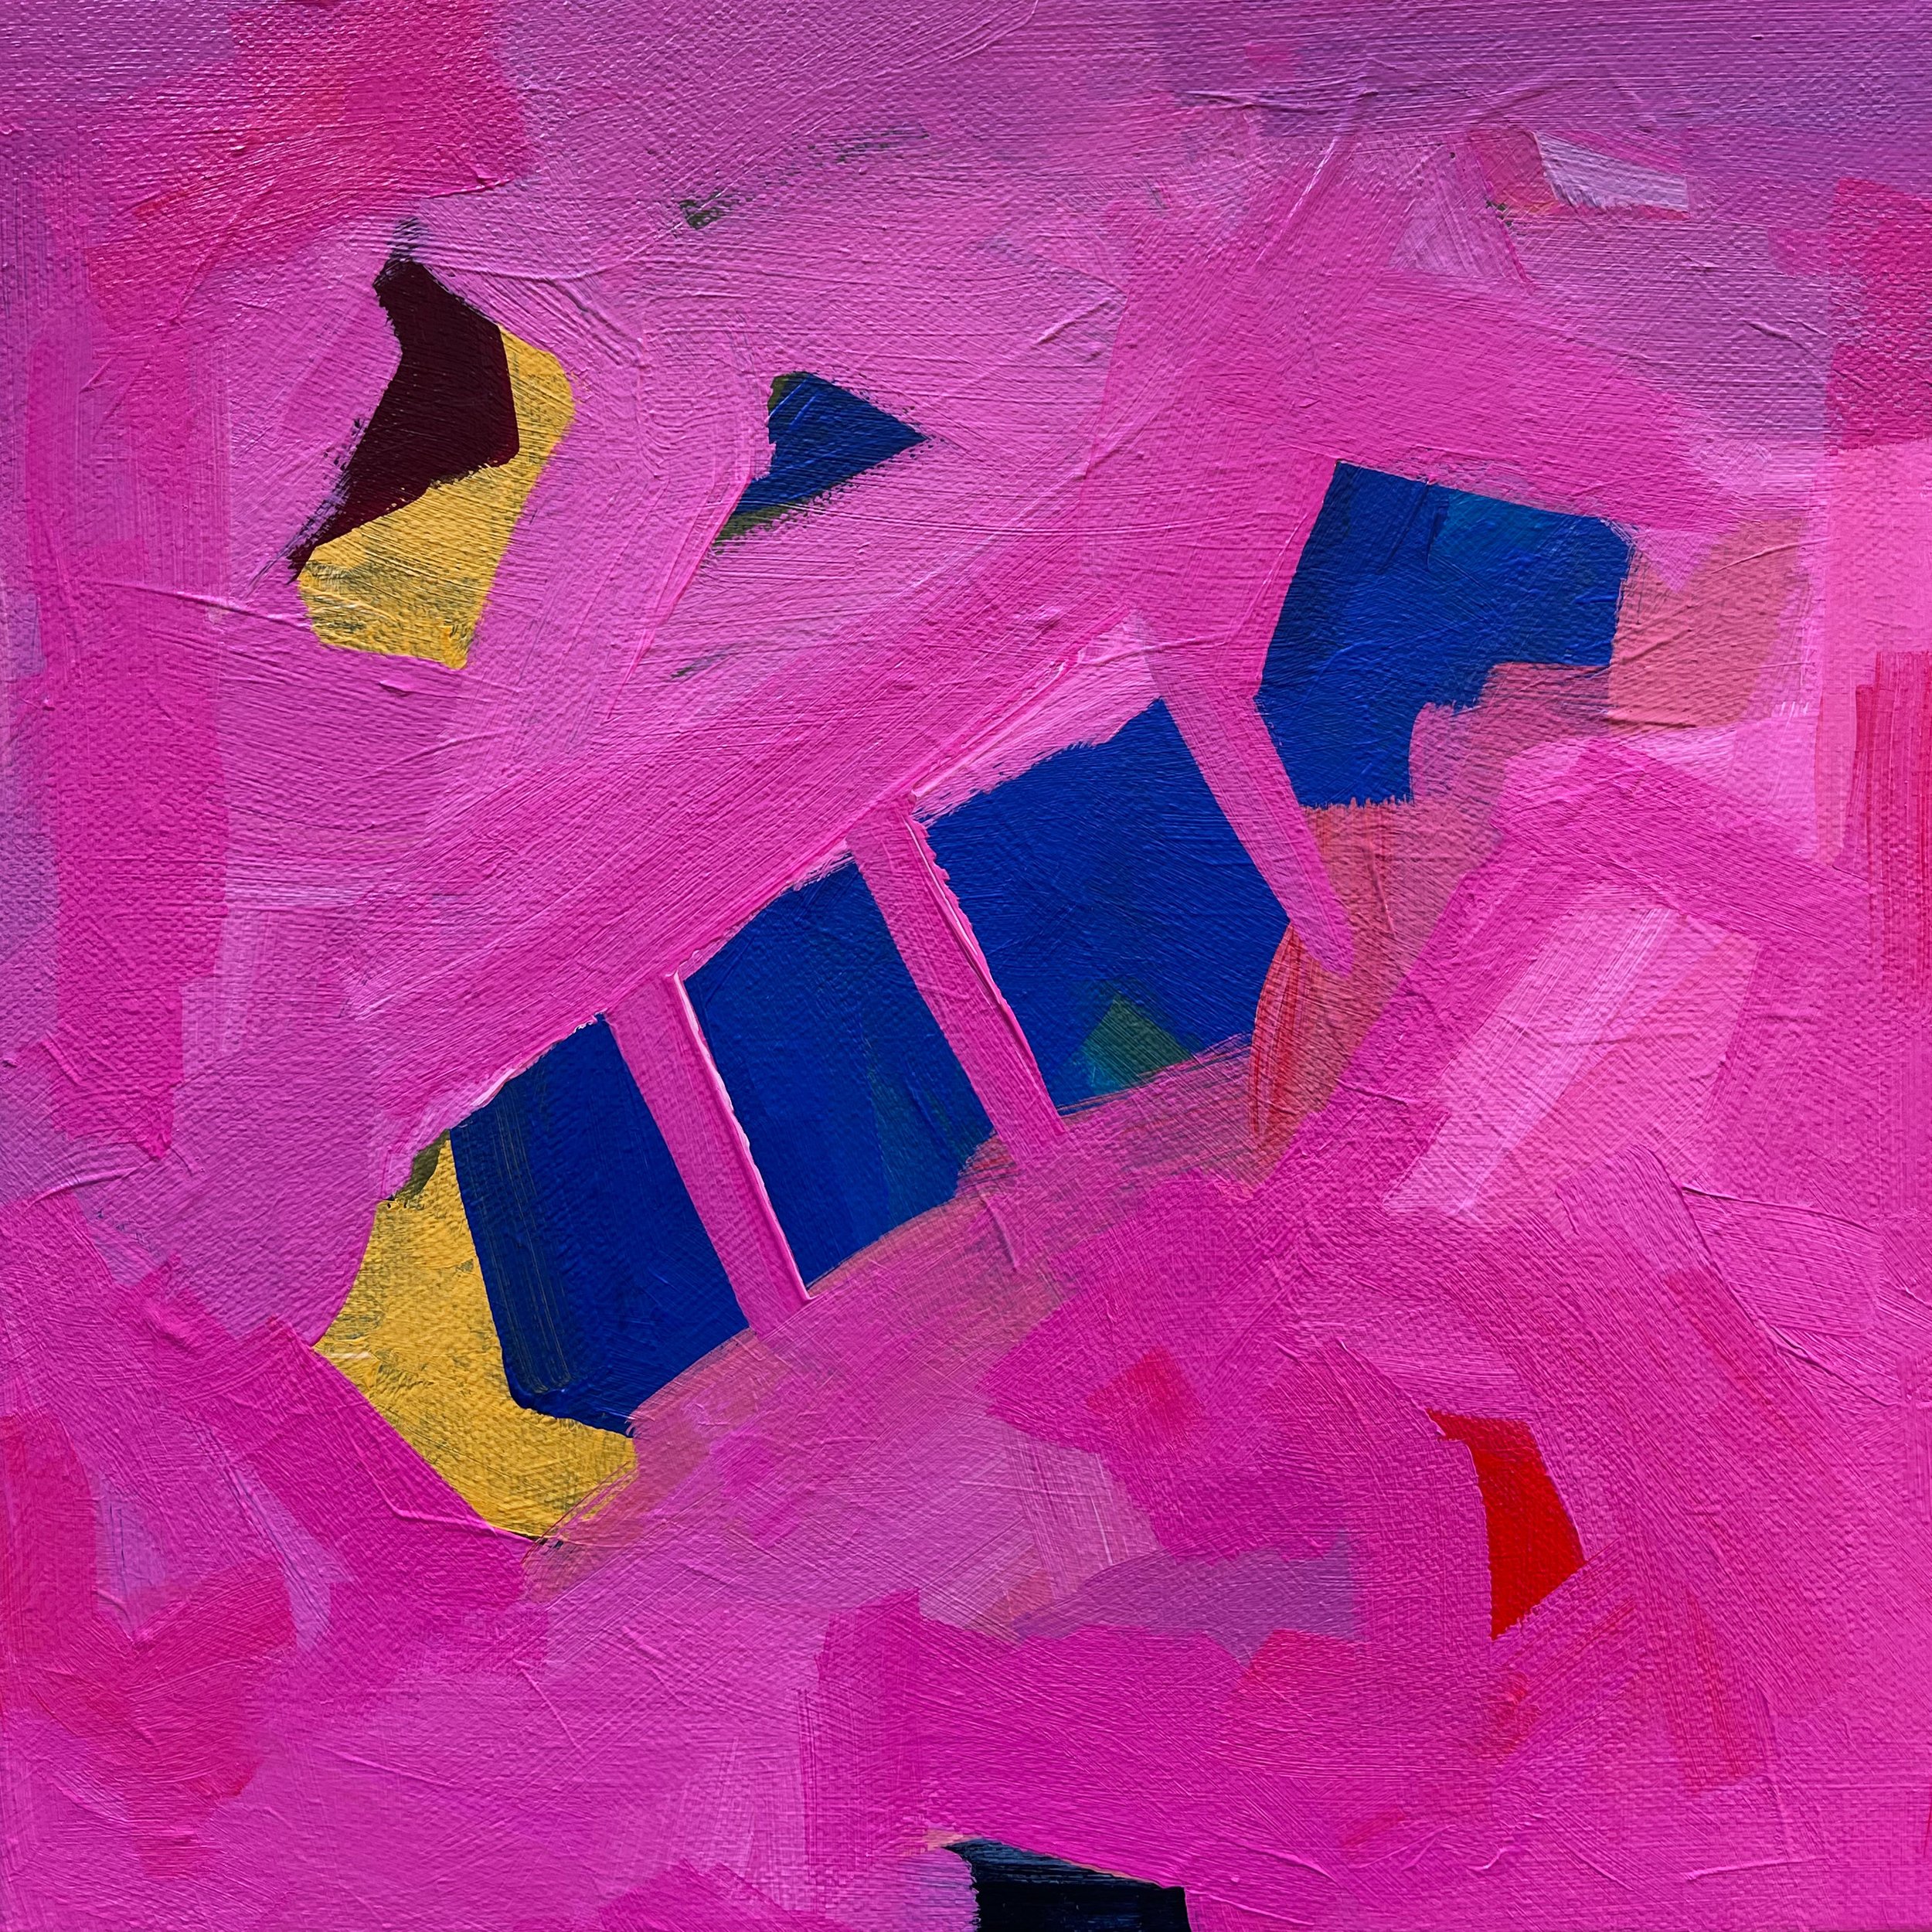   Moored , 2023 Acrylic on canvas 10 x 10 inches (25.4 x 25.4 cm)   